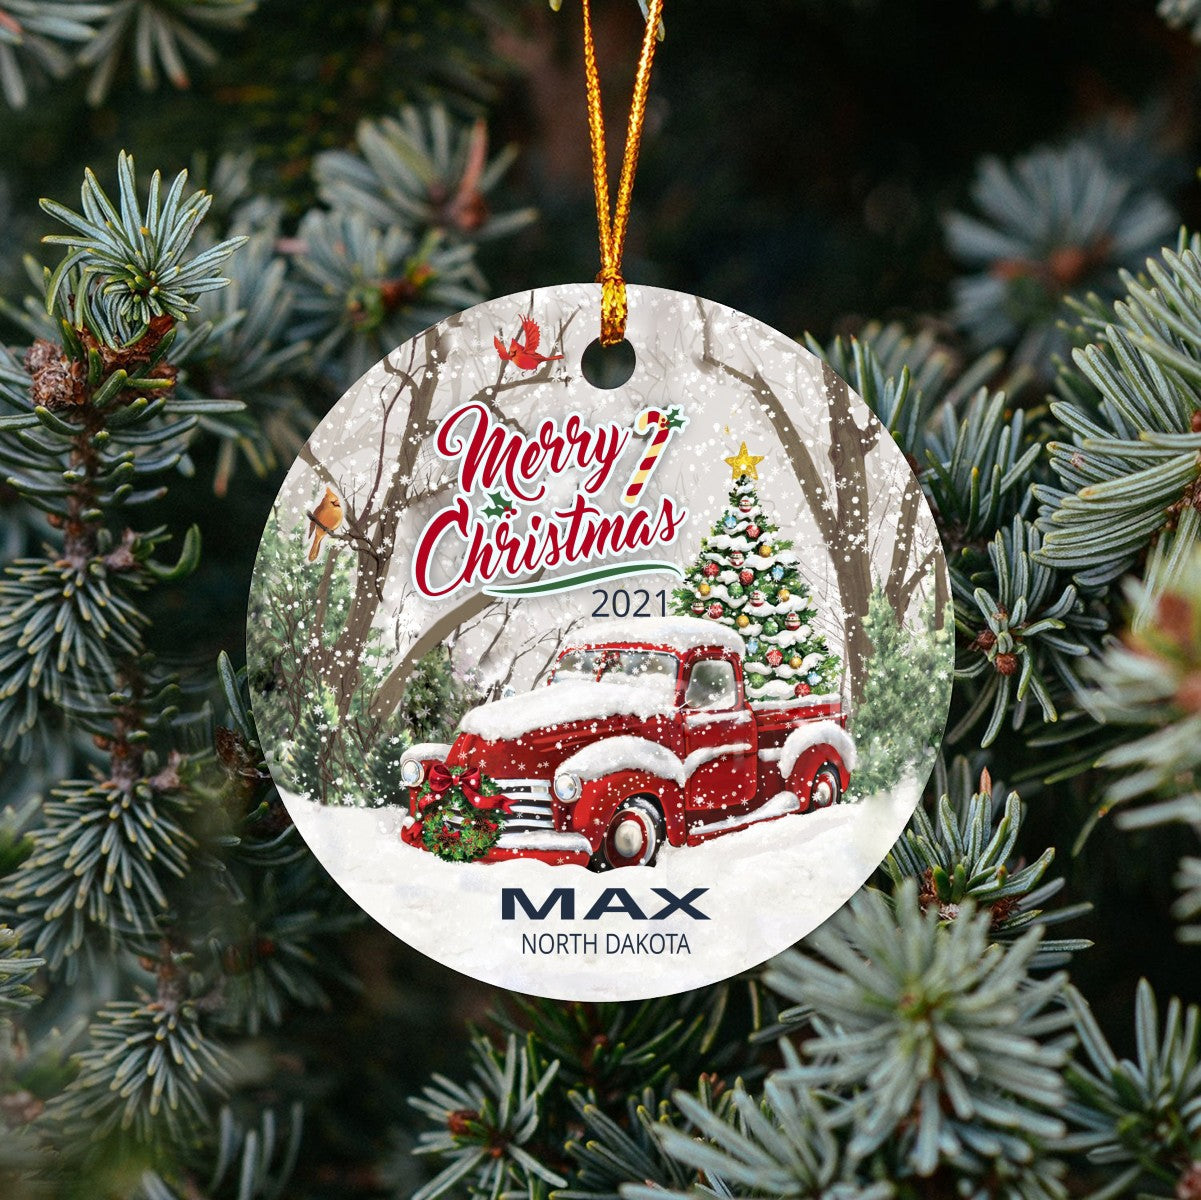 Christmas Tree Ornaments Max - Ornament With Name City, State Max North Dakota ND Ornament - Red Truck Xmas Ornaments 3'' Plastic Gift For Family, Friend And Housewarming